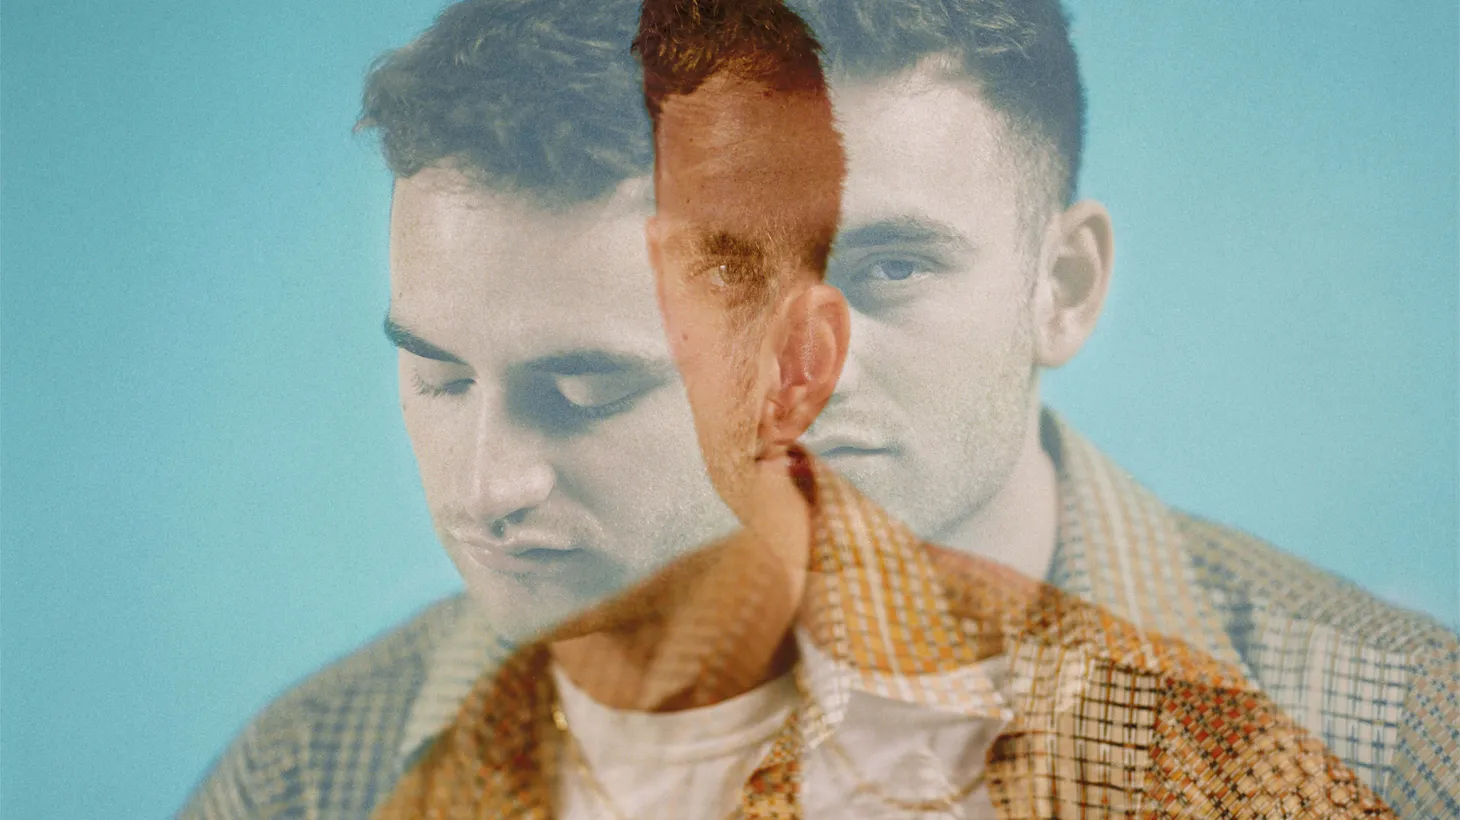 Tom Misch was voted "Best New Artist" by KCRW's Djs last year and just released his debut album. He’s a musical chameleon who hopscotches across genres with ease, and we can’t wait to hear it live in his first US radio session.